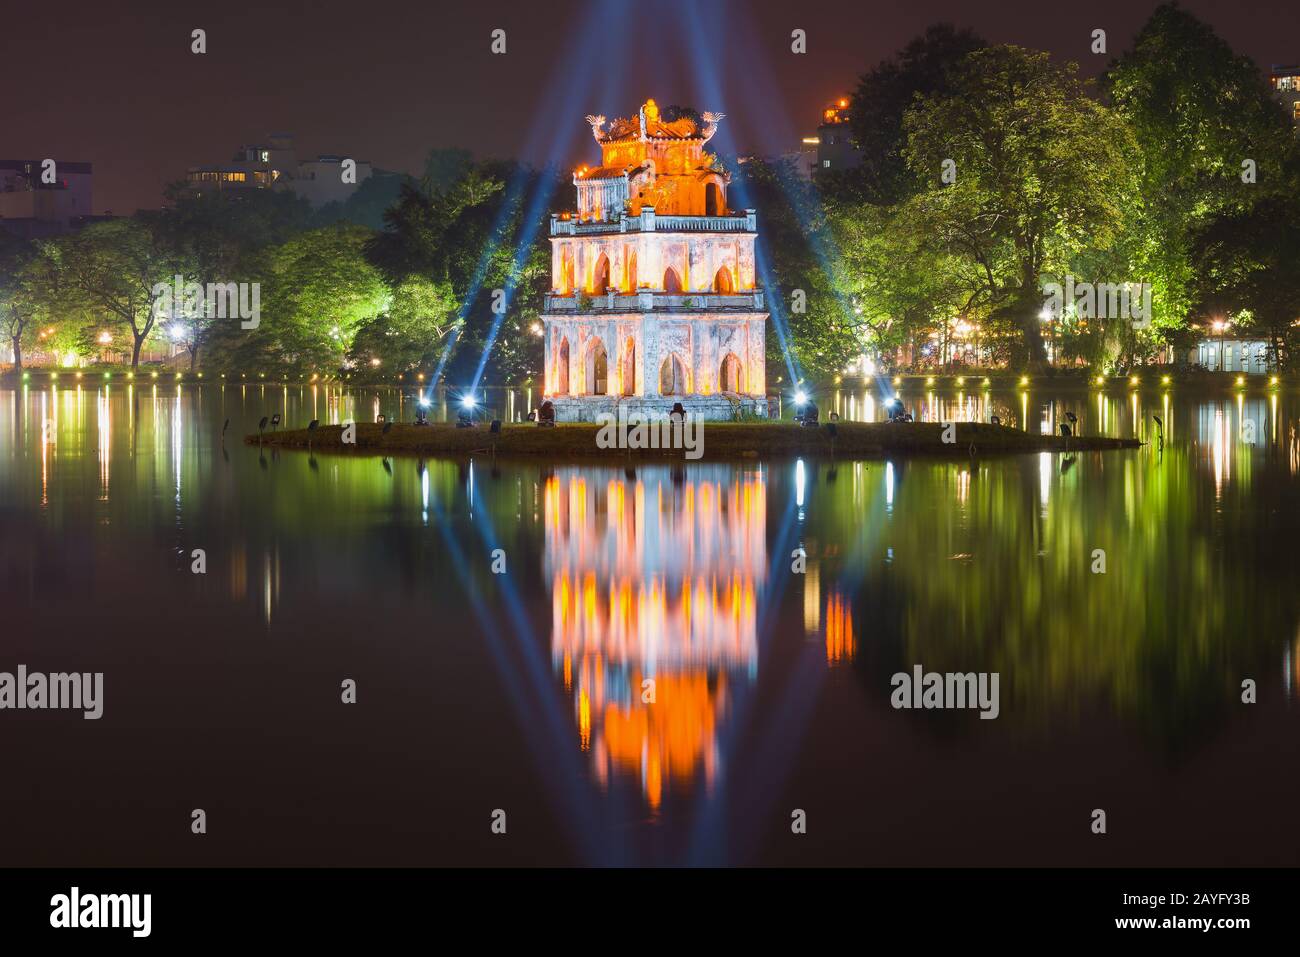 The ancient Turtle Tower in the rays of the floodlights on Hoan Kiem Lake in the late evening. Hanoi, Vietnam Stock Photo